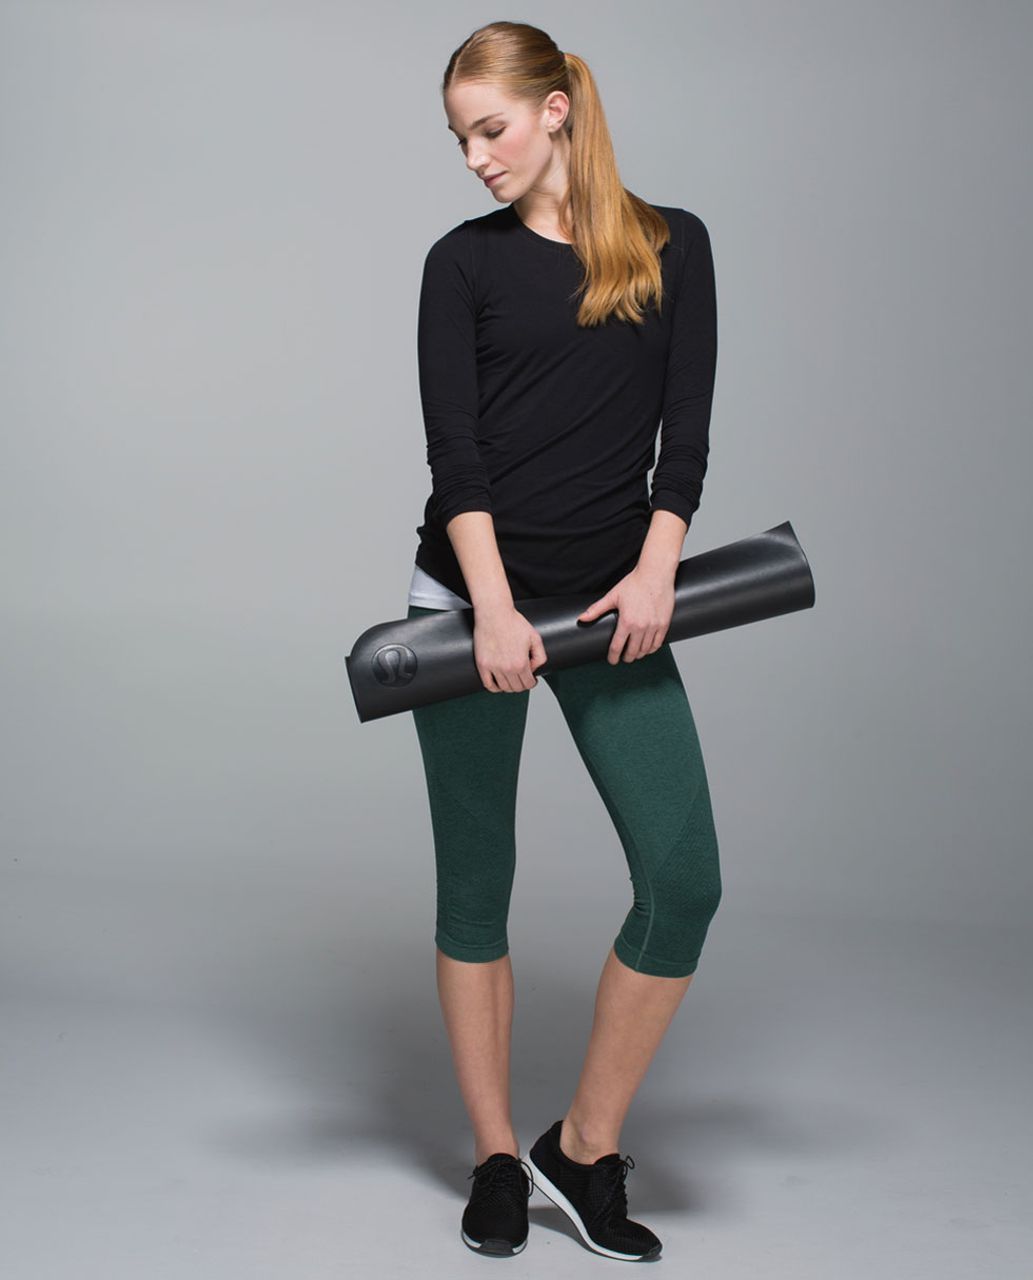 Lululemon In The Flow Crop II - Heathered Forest